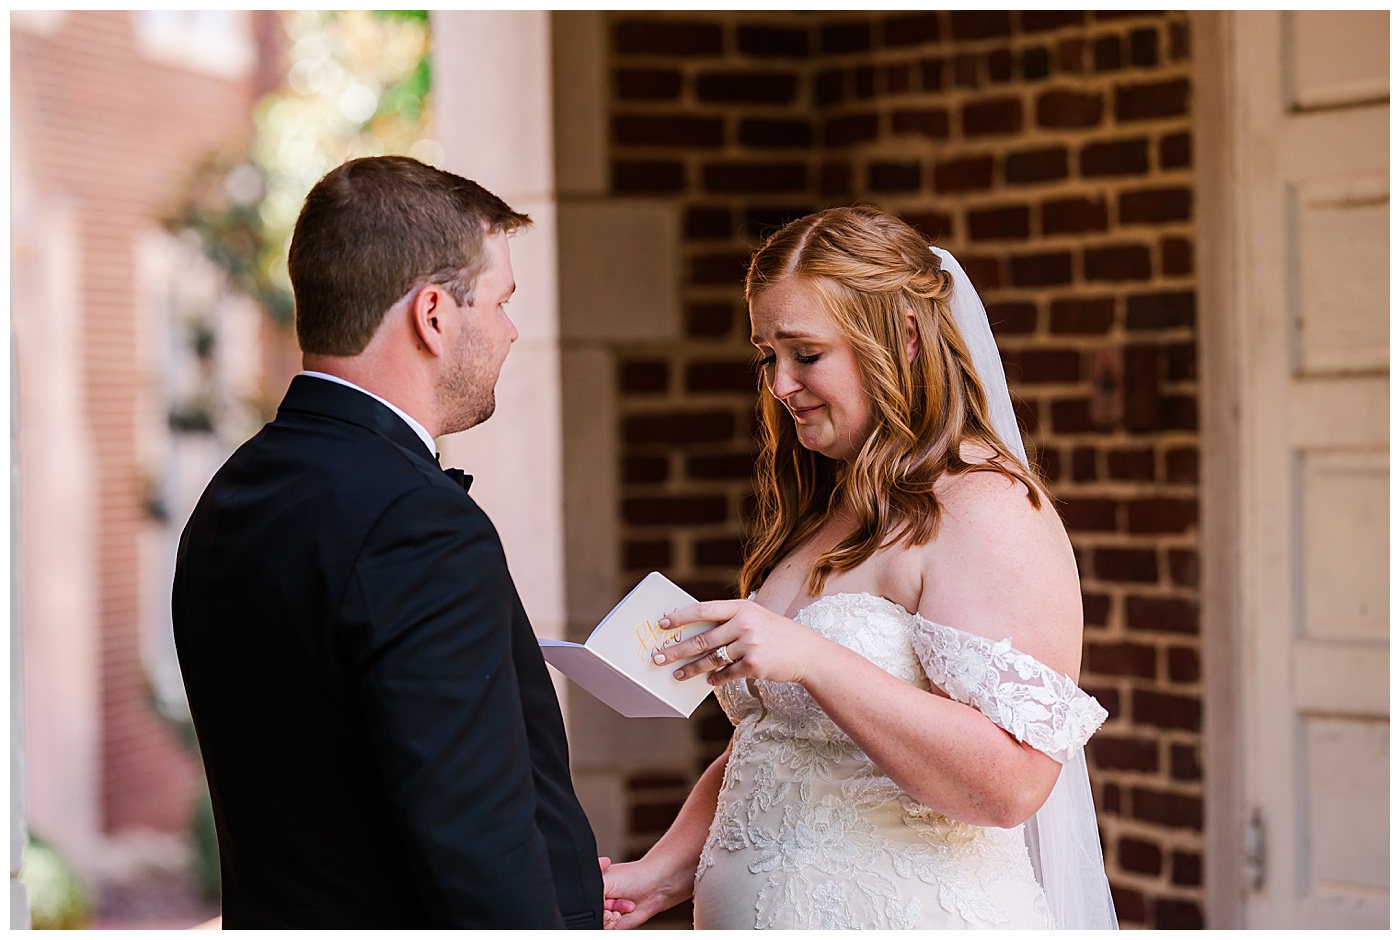 Baylor School Couple Private Vows